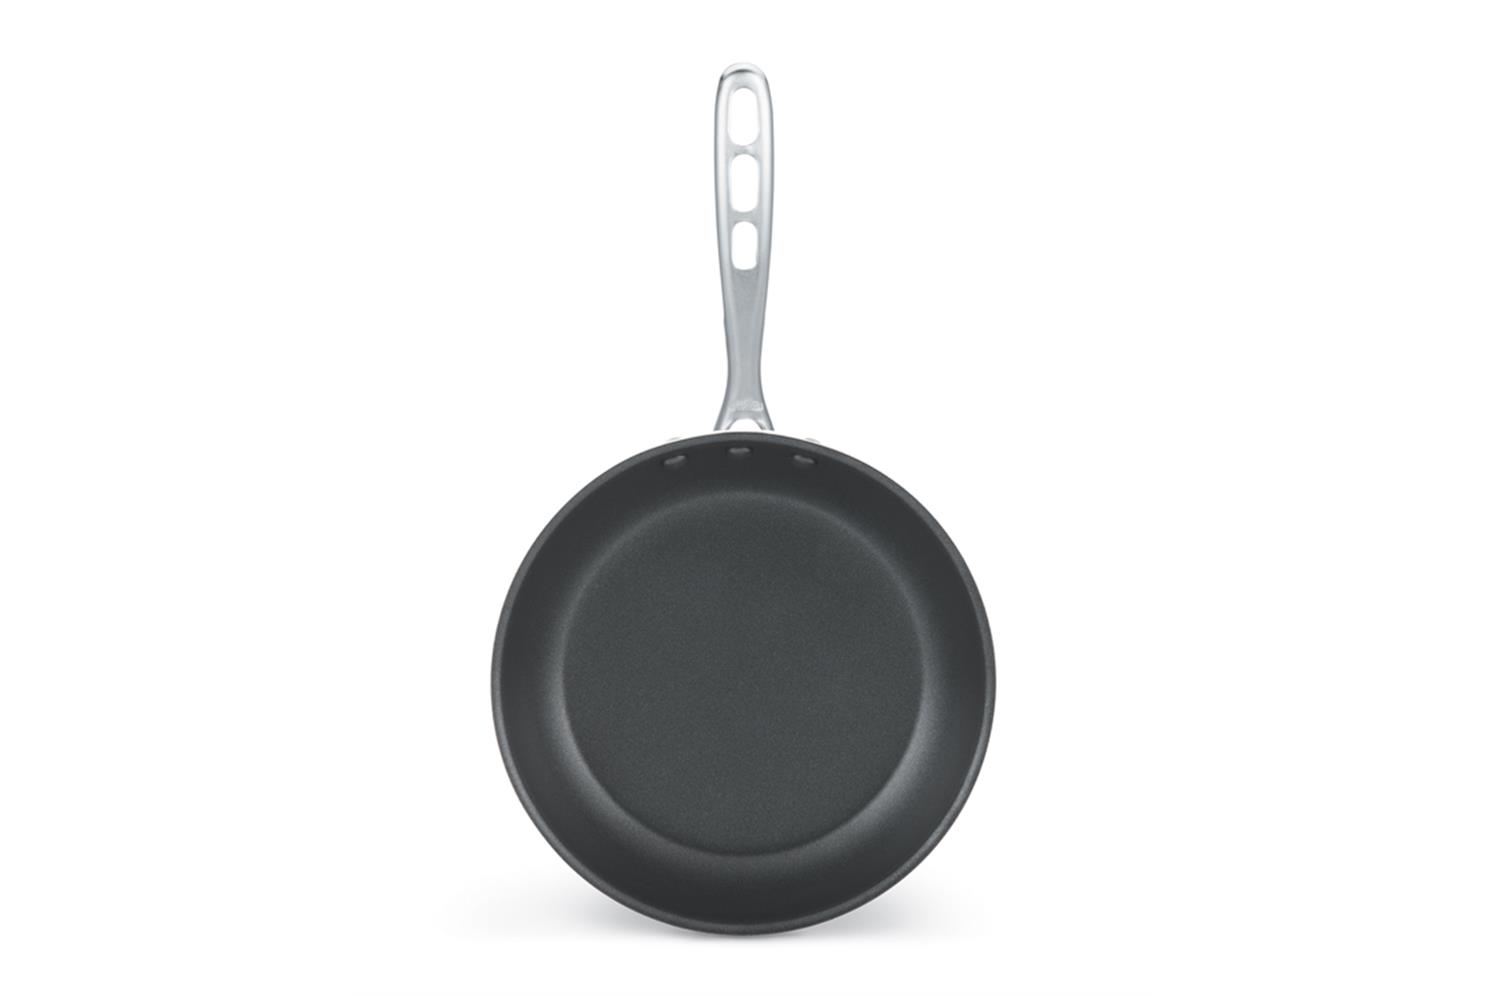 Vollrath 67952 Wear-Ever Fry Pans with CeramiGuard II Interior with TriVent Handle